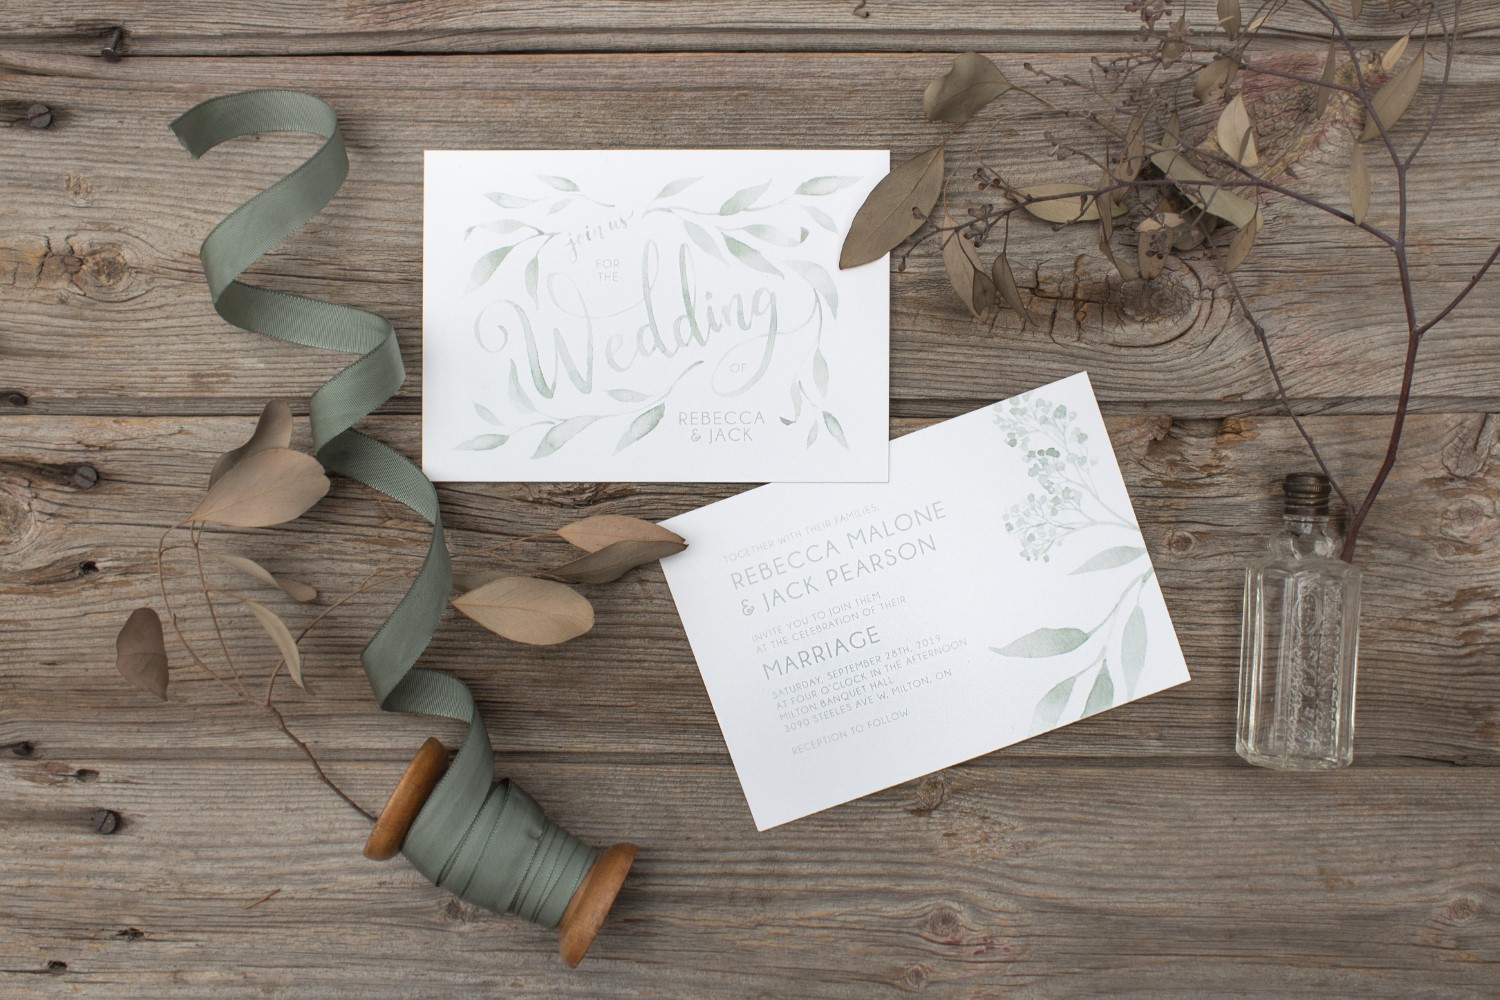 Monochromatic Blush or Teal Watercolour Leaves and Typography Wedding Invitations by Alicia's Infinity - www.aliciasinfinity.com